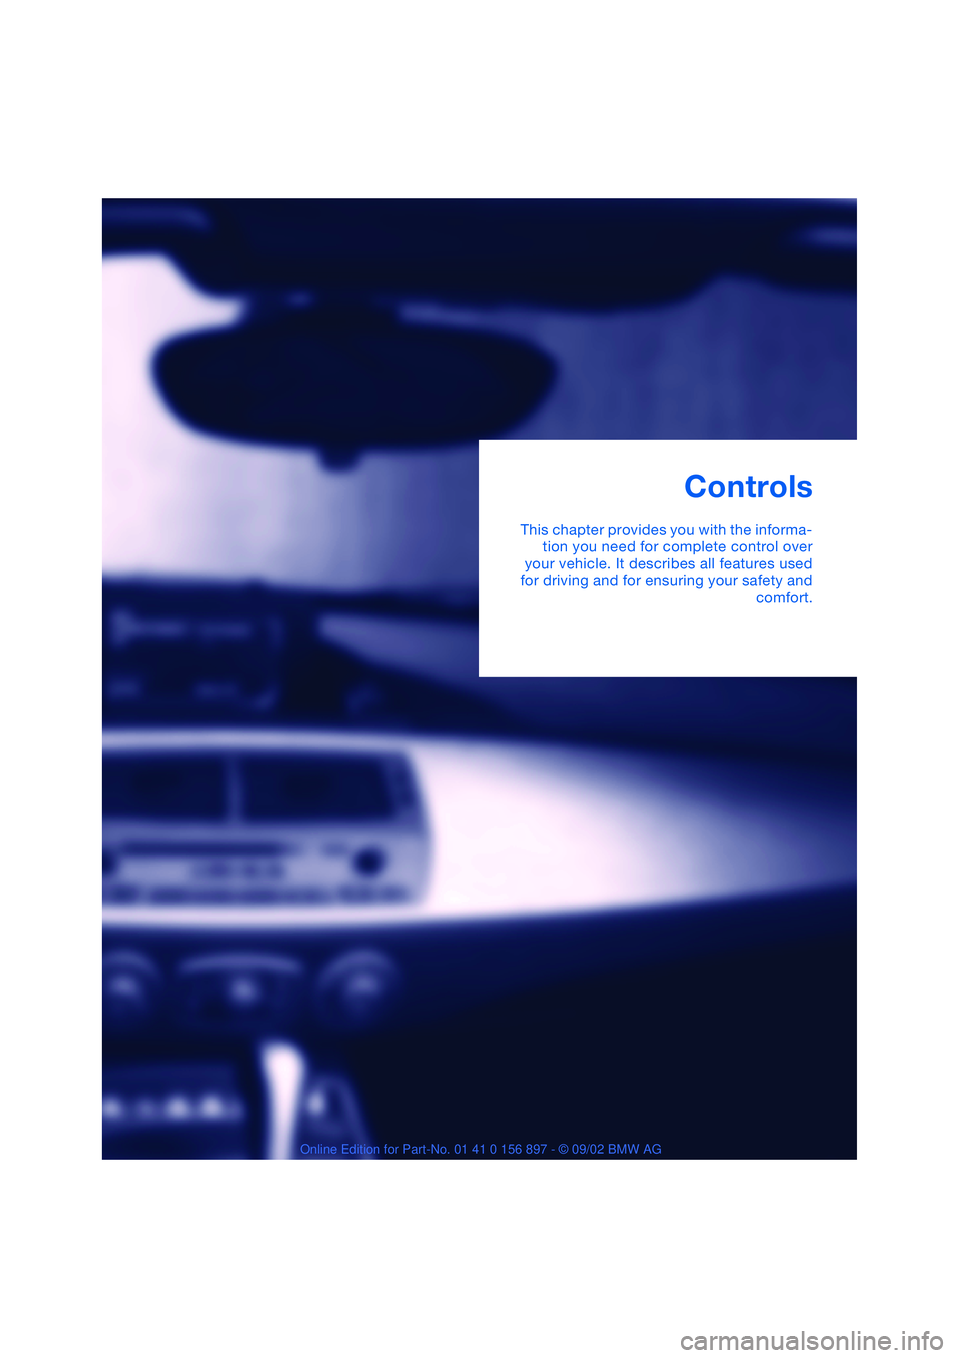 BMW 3.0i ROADSTER 2003 User Guide Controls
This chapter provides you with the informa-
tion you need for complete control over
your vehicle. It describes all features used
for driving and for ensuring your safety and
comfort. 